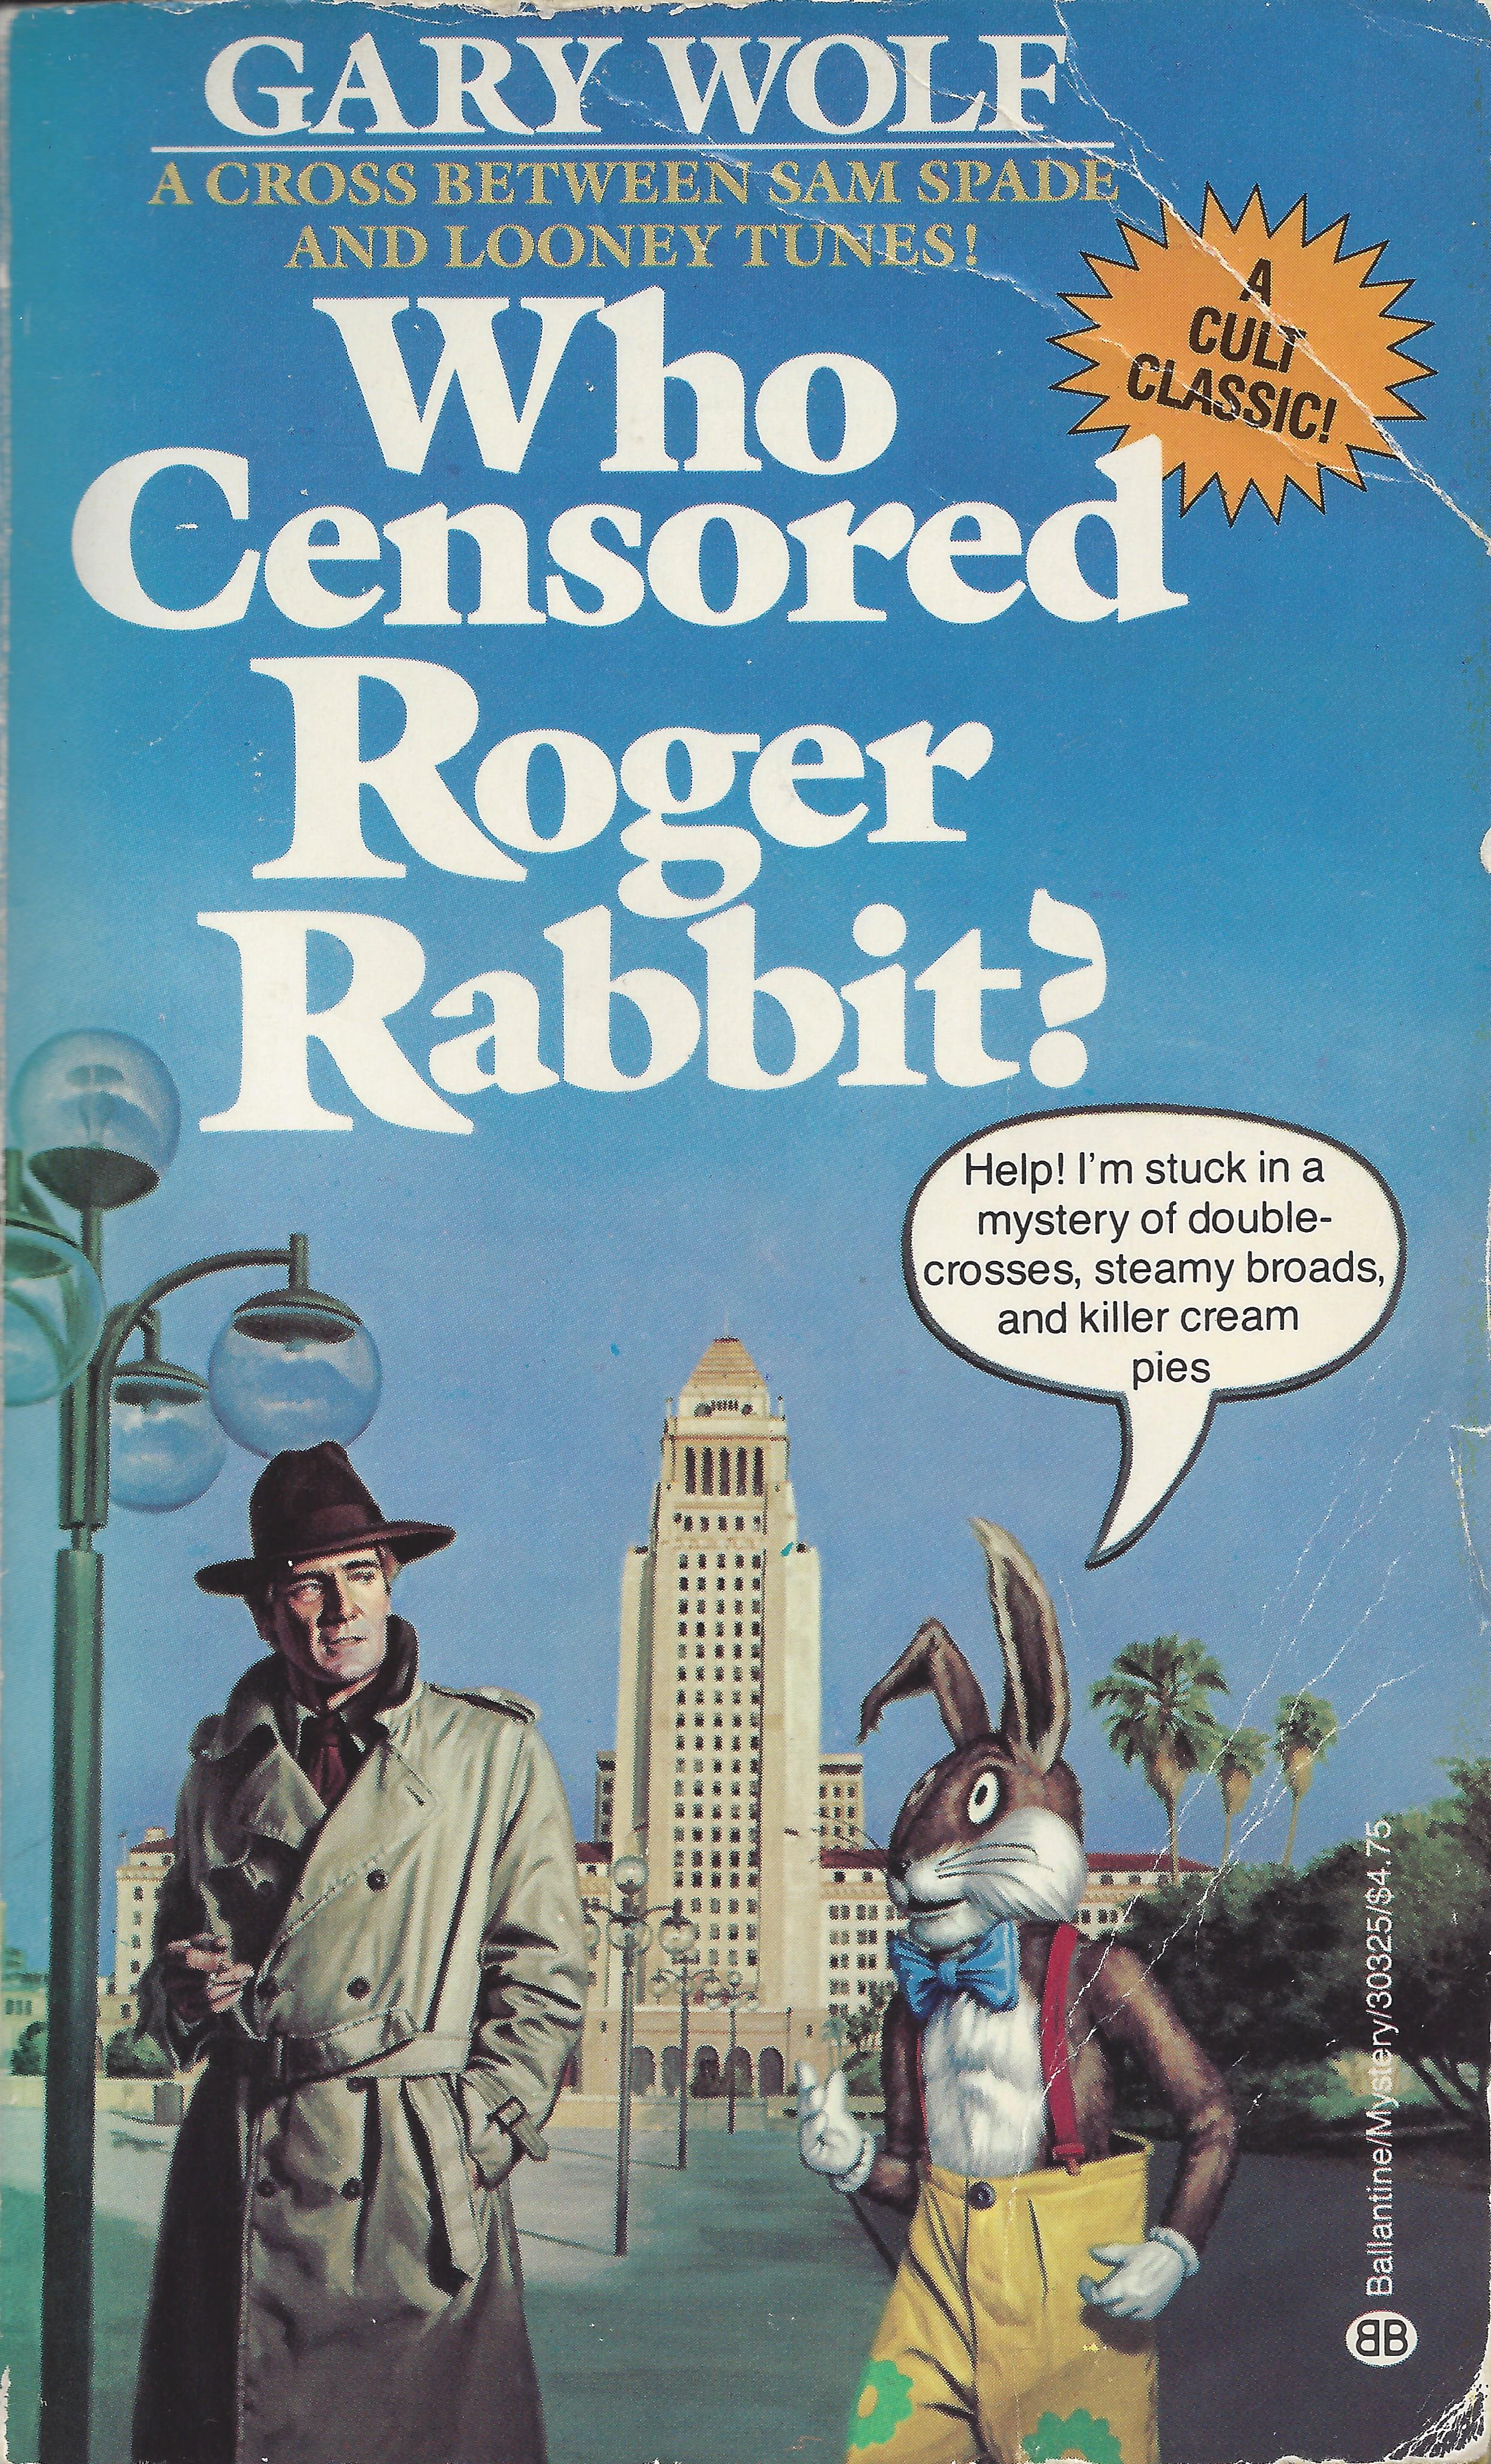 ‘Who Censored Roger Rabbit?’ – Pulling a Rabbit Out of a Hat